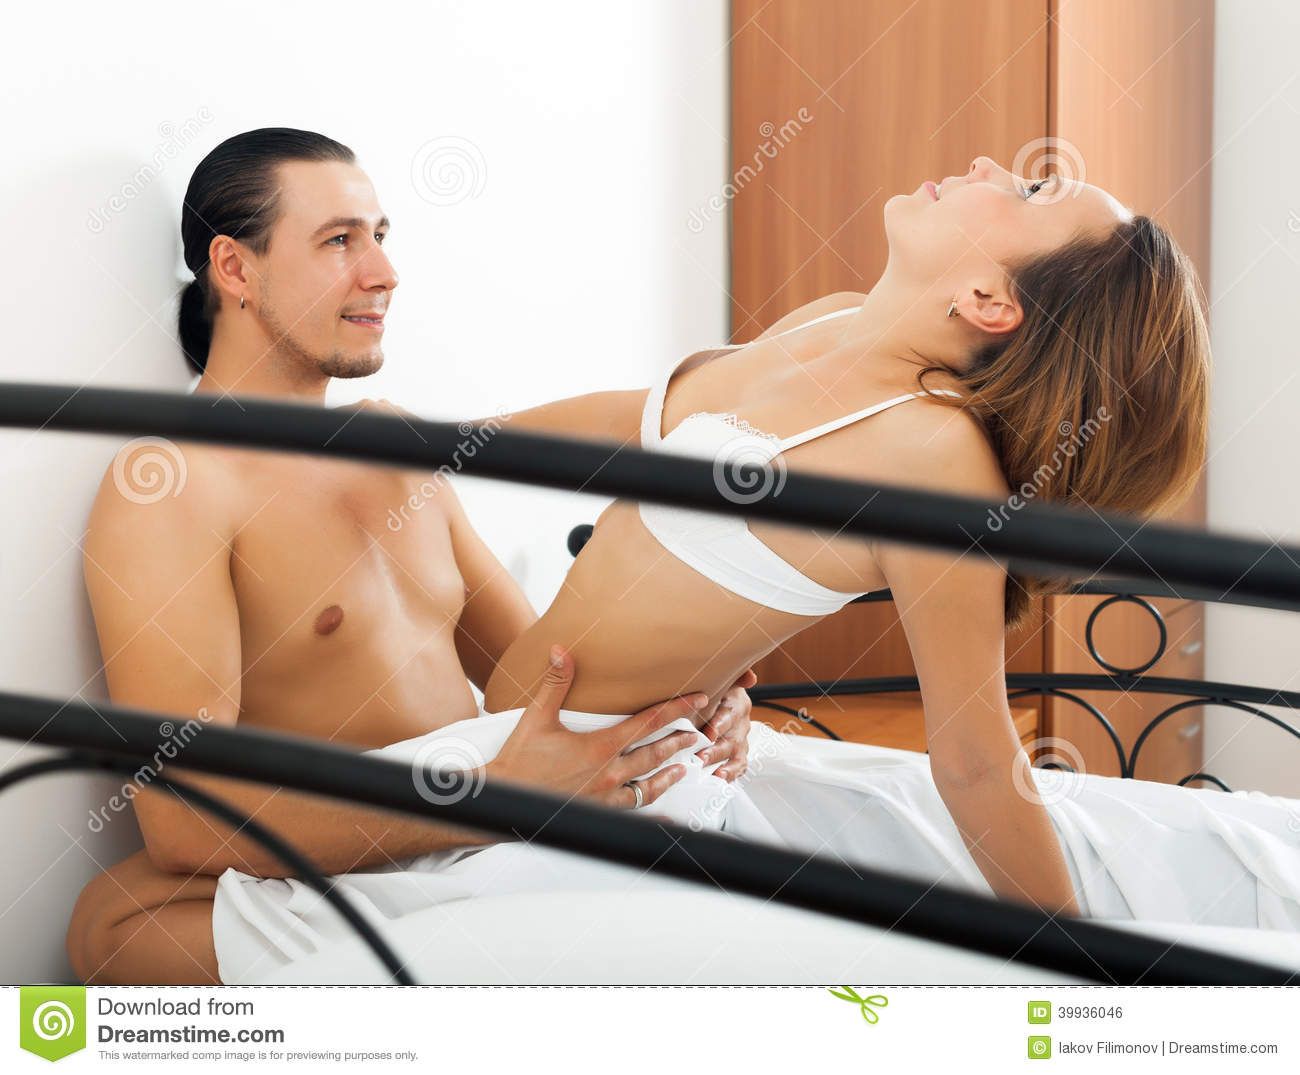 A woman and a man having sex